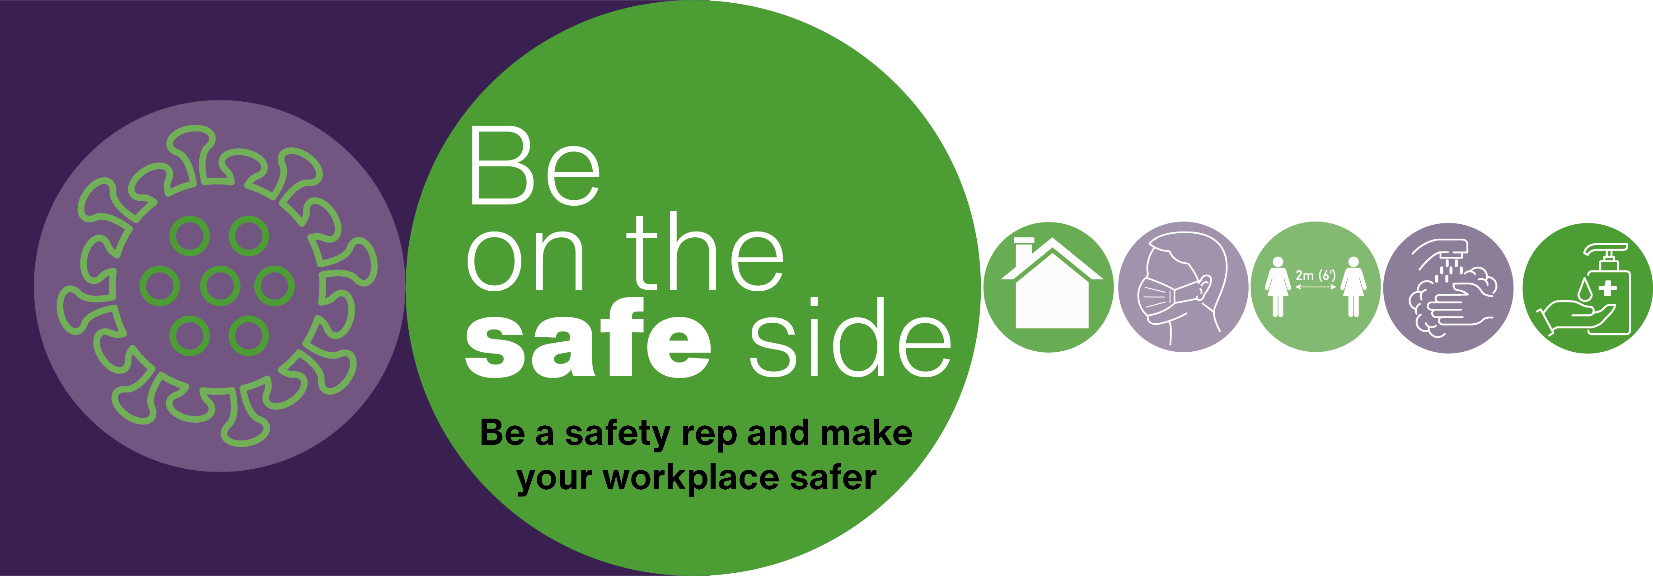 Be On The Safe Side - Be a safety rep and make your workplace safer - Logo